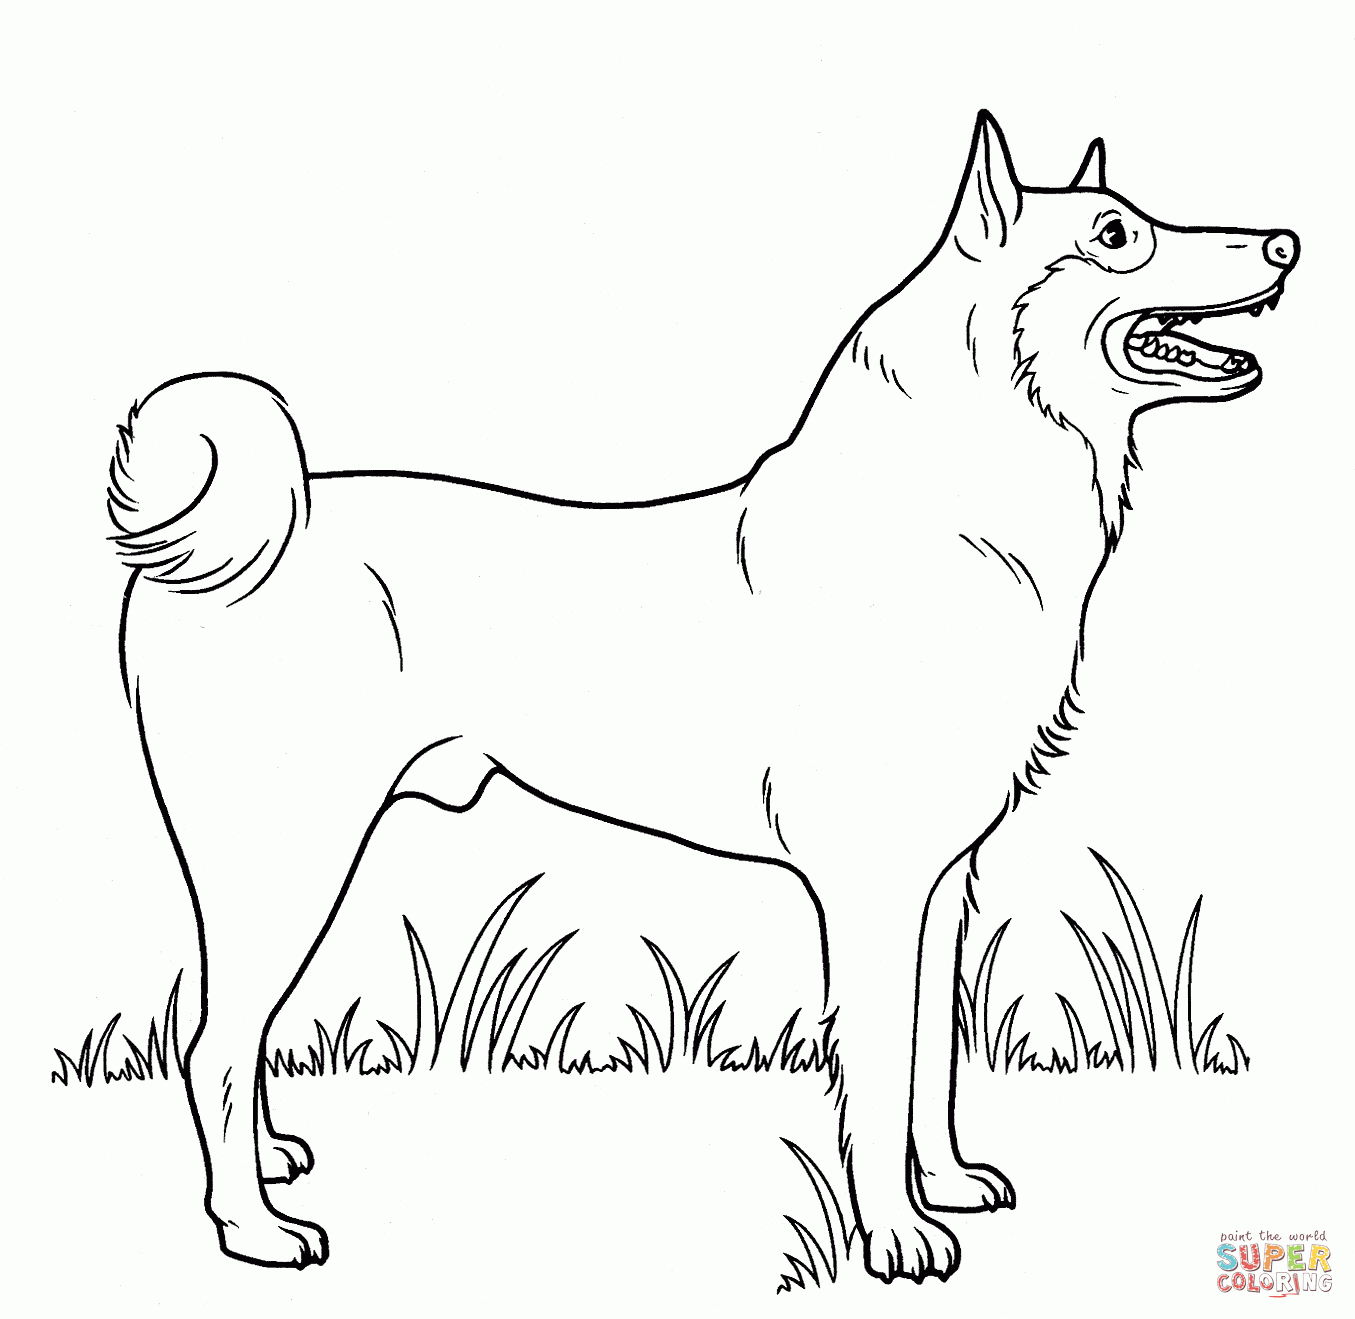 Dogs Coloring Pages | Free Coloring Pages - Free Printable Dog Coloring Pages